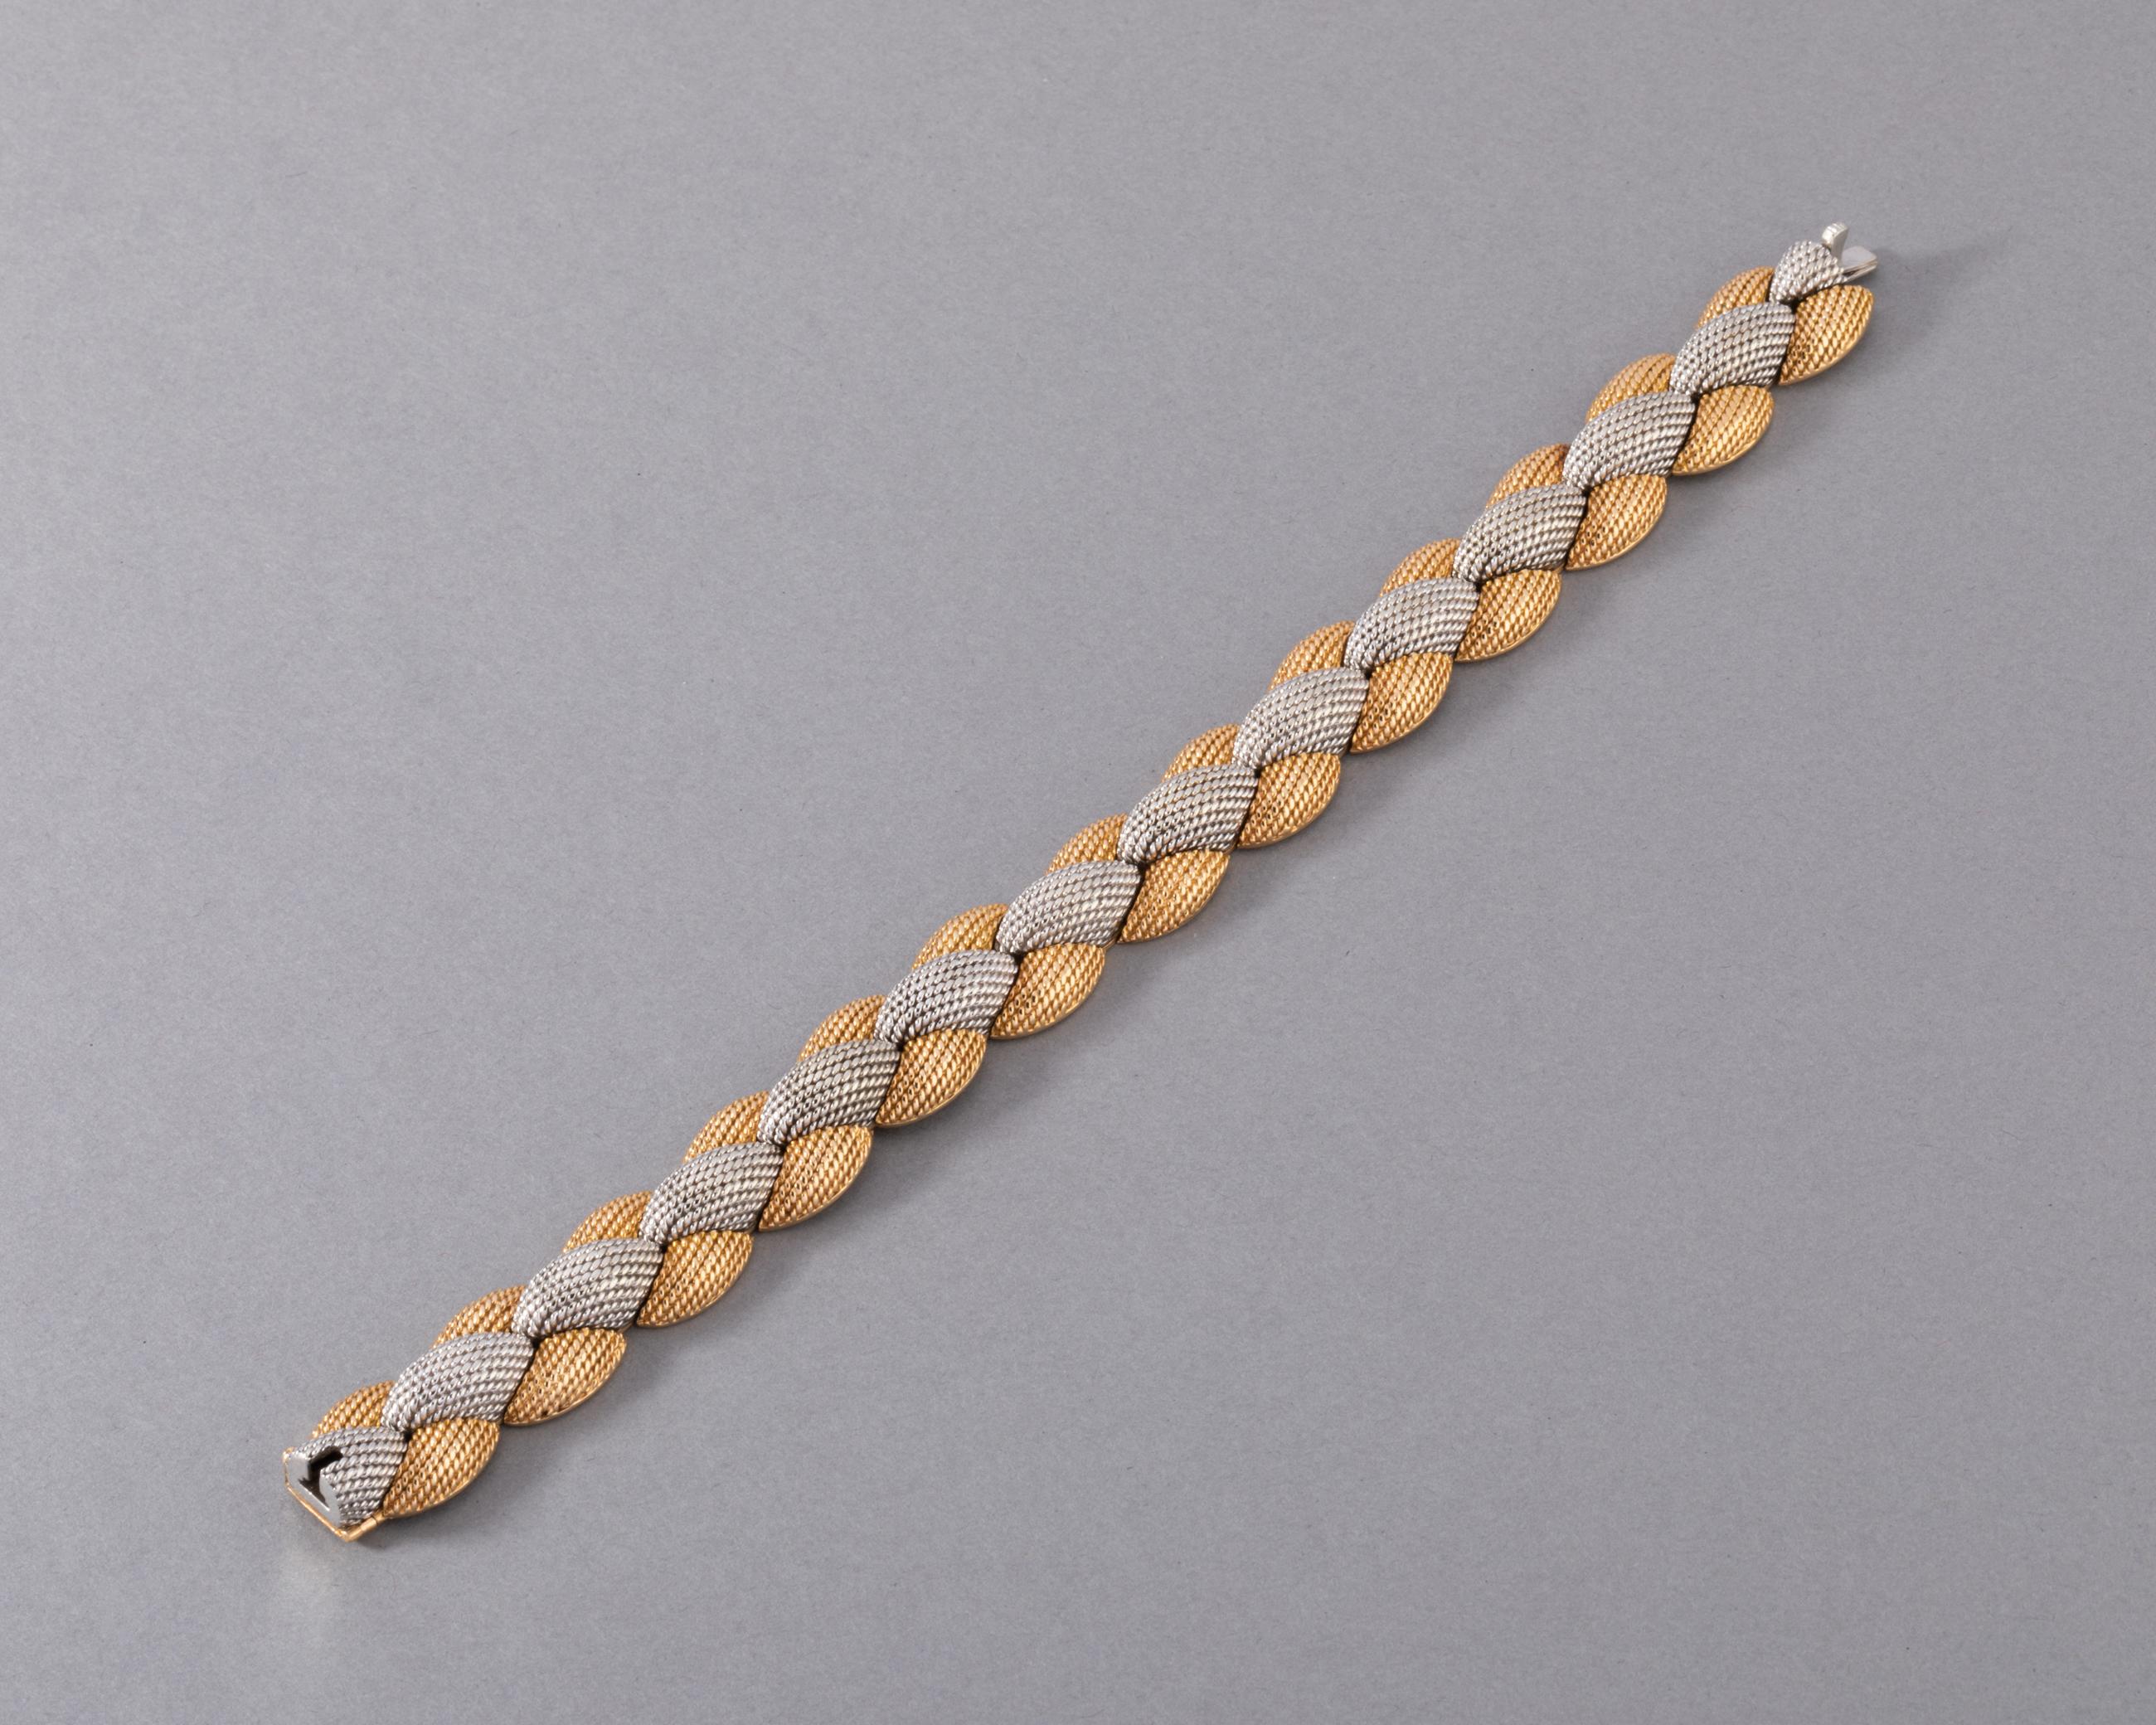 One lovely vintage bracelet, made by great maker Pierre Sterlé.
Made in France circa 1960. Made in yellow gold 18k and platinum. Signed Sterlé PARIS
The length is 18 cm.
14 mm width. 
Total weight: 82.90 grams